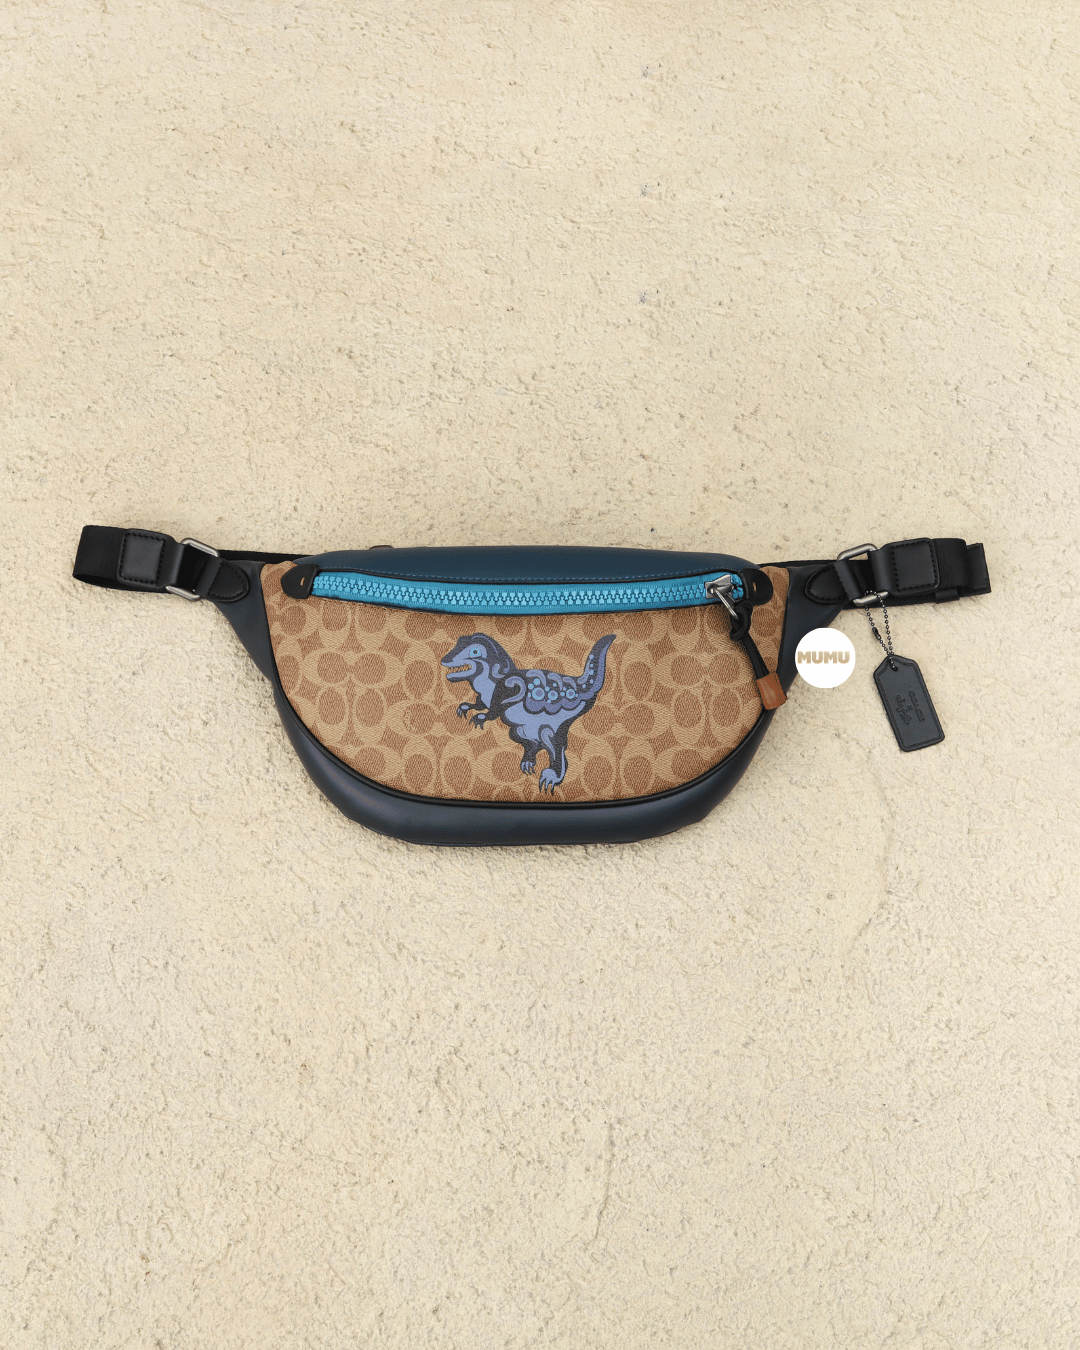 NWT Coach Elias Leather Belt Bag With Puffy Diamond Quilting in Teal | eBay